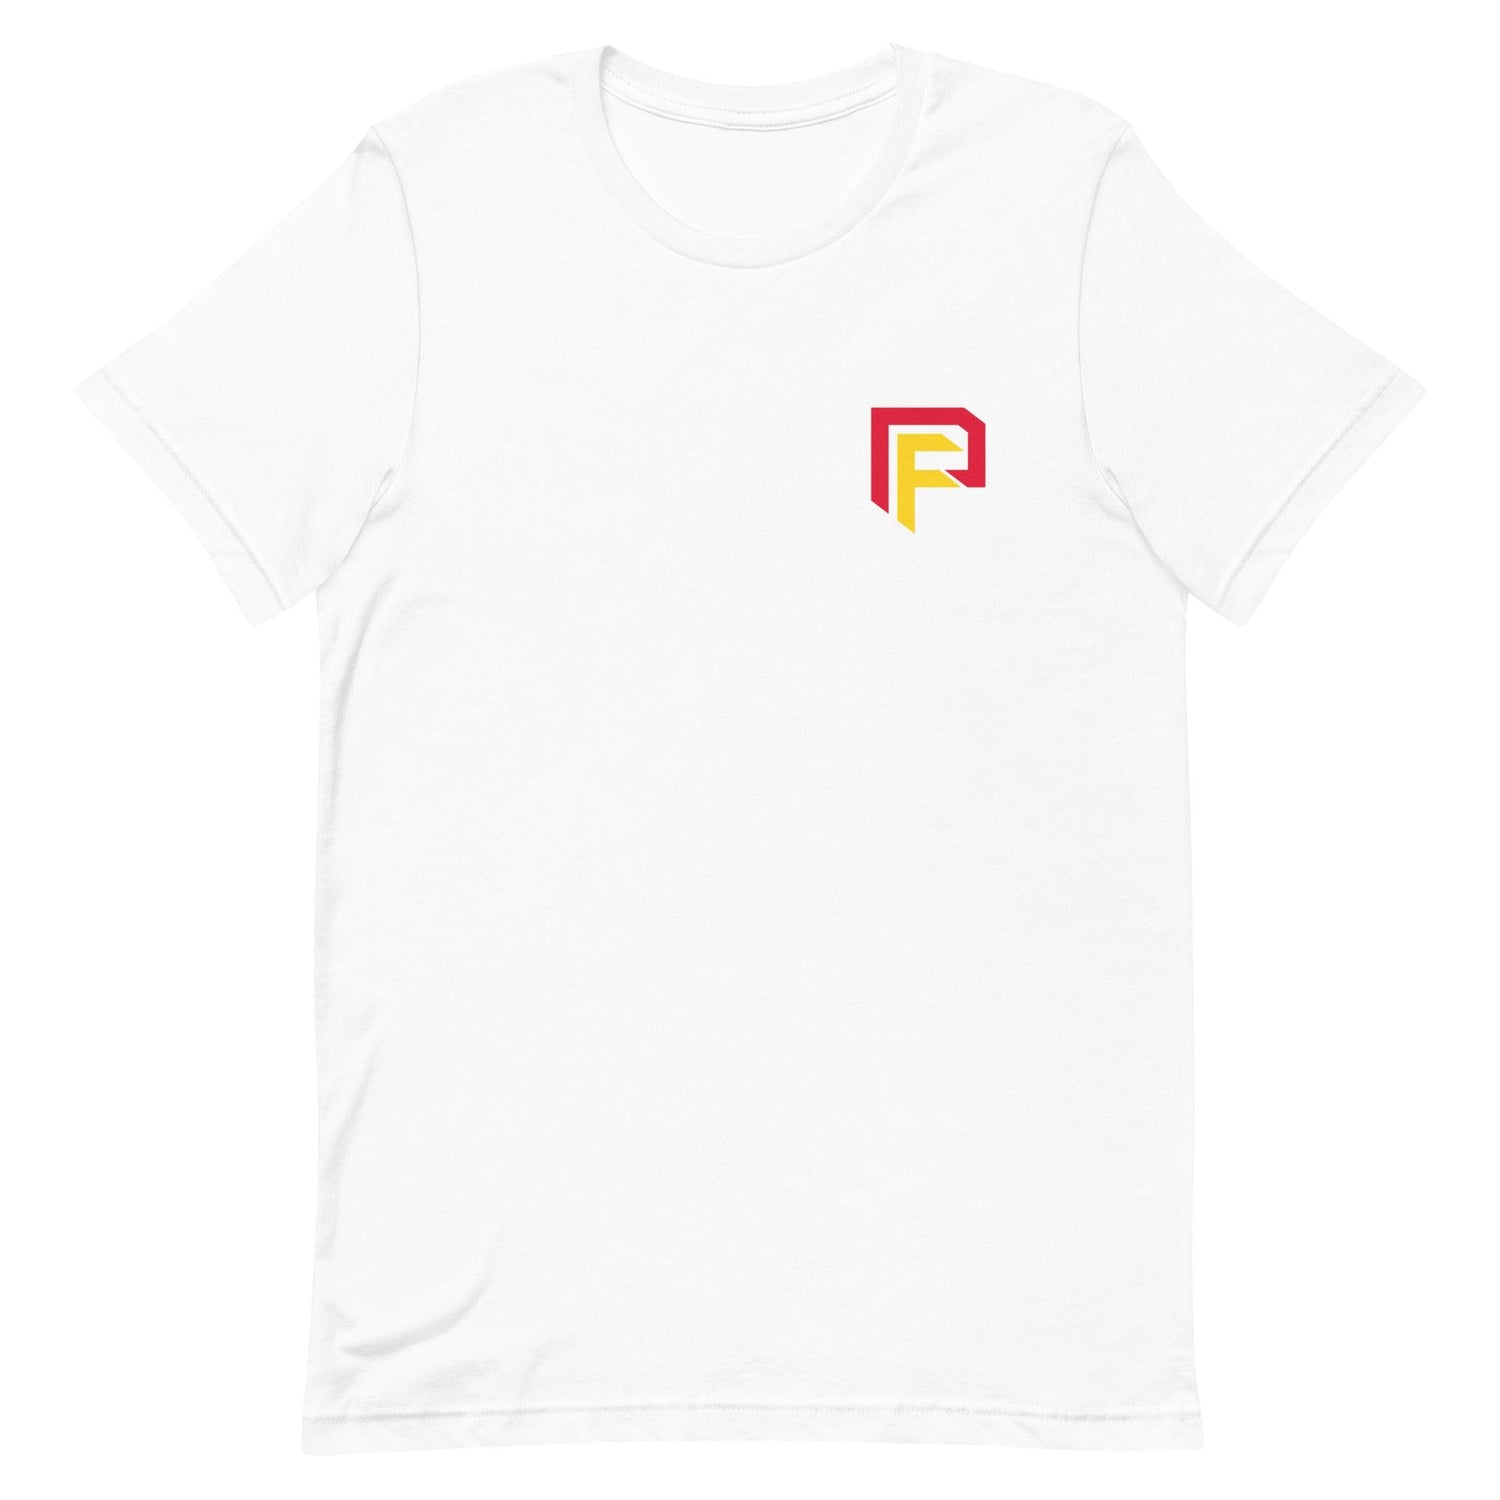 Perry Fisher "Essential" t-shirt - Fan Arch